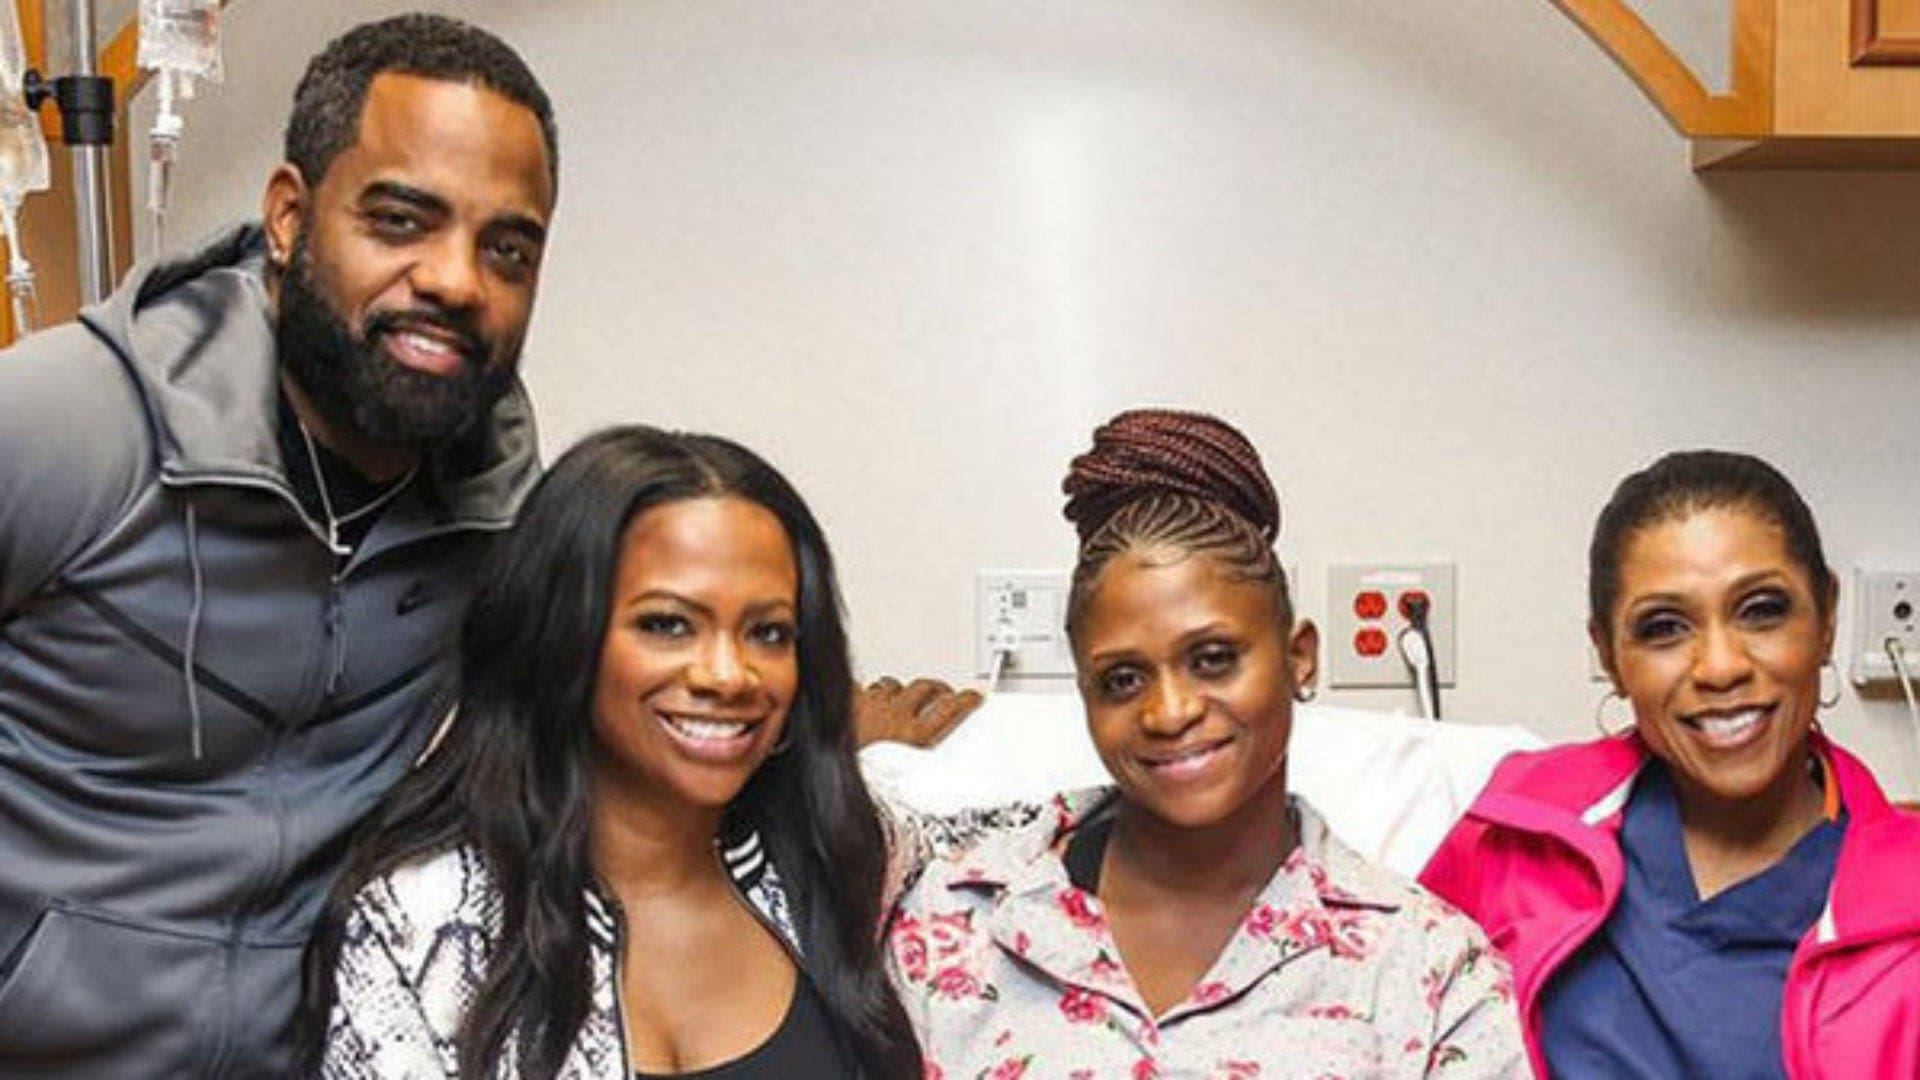 Kandi Burruss Praises The Surrogate Mother Who Helped Her Have Baby Blaze Tucker